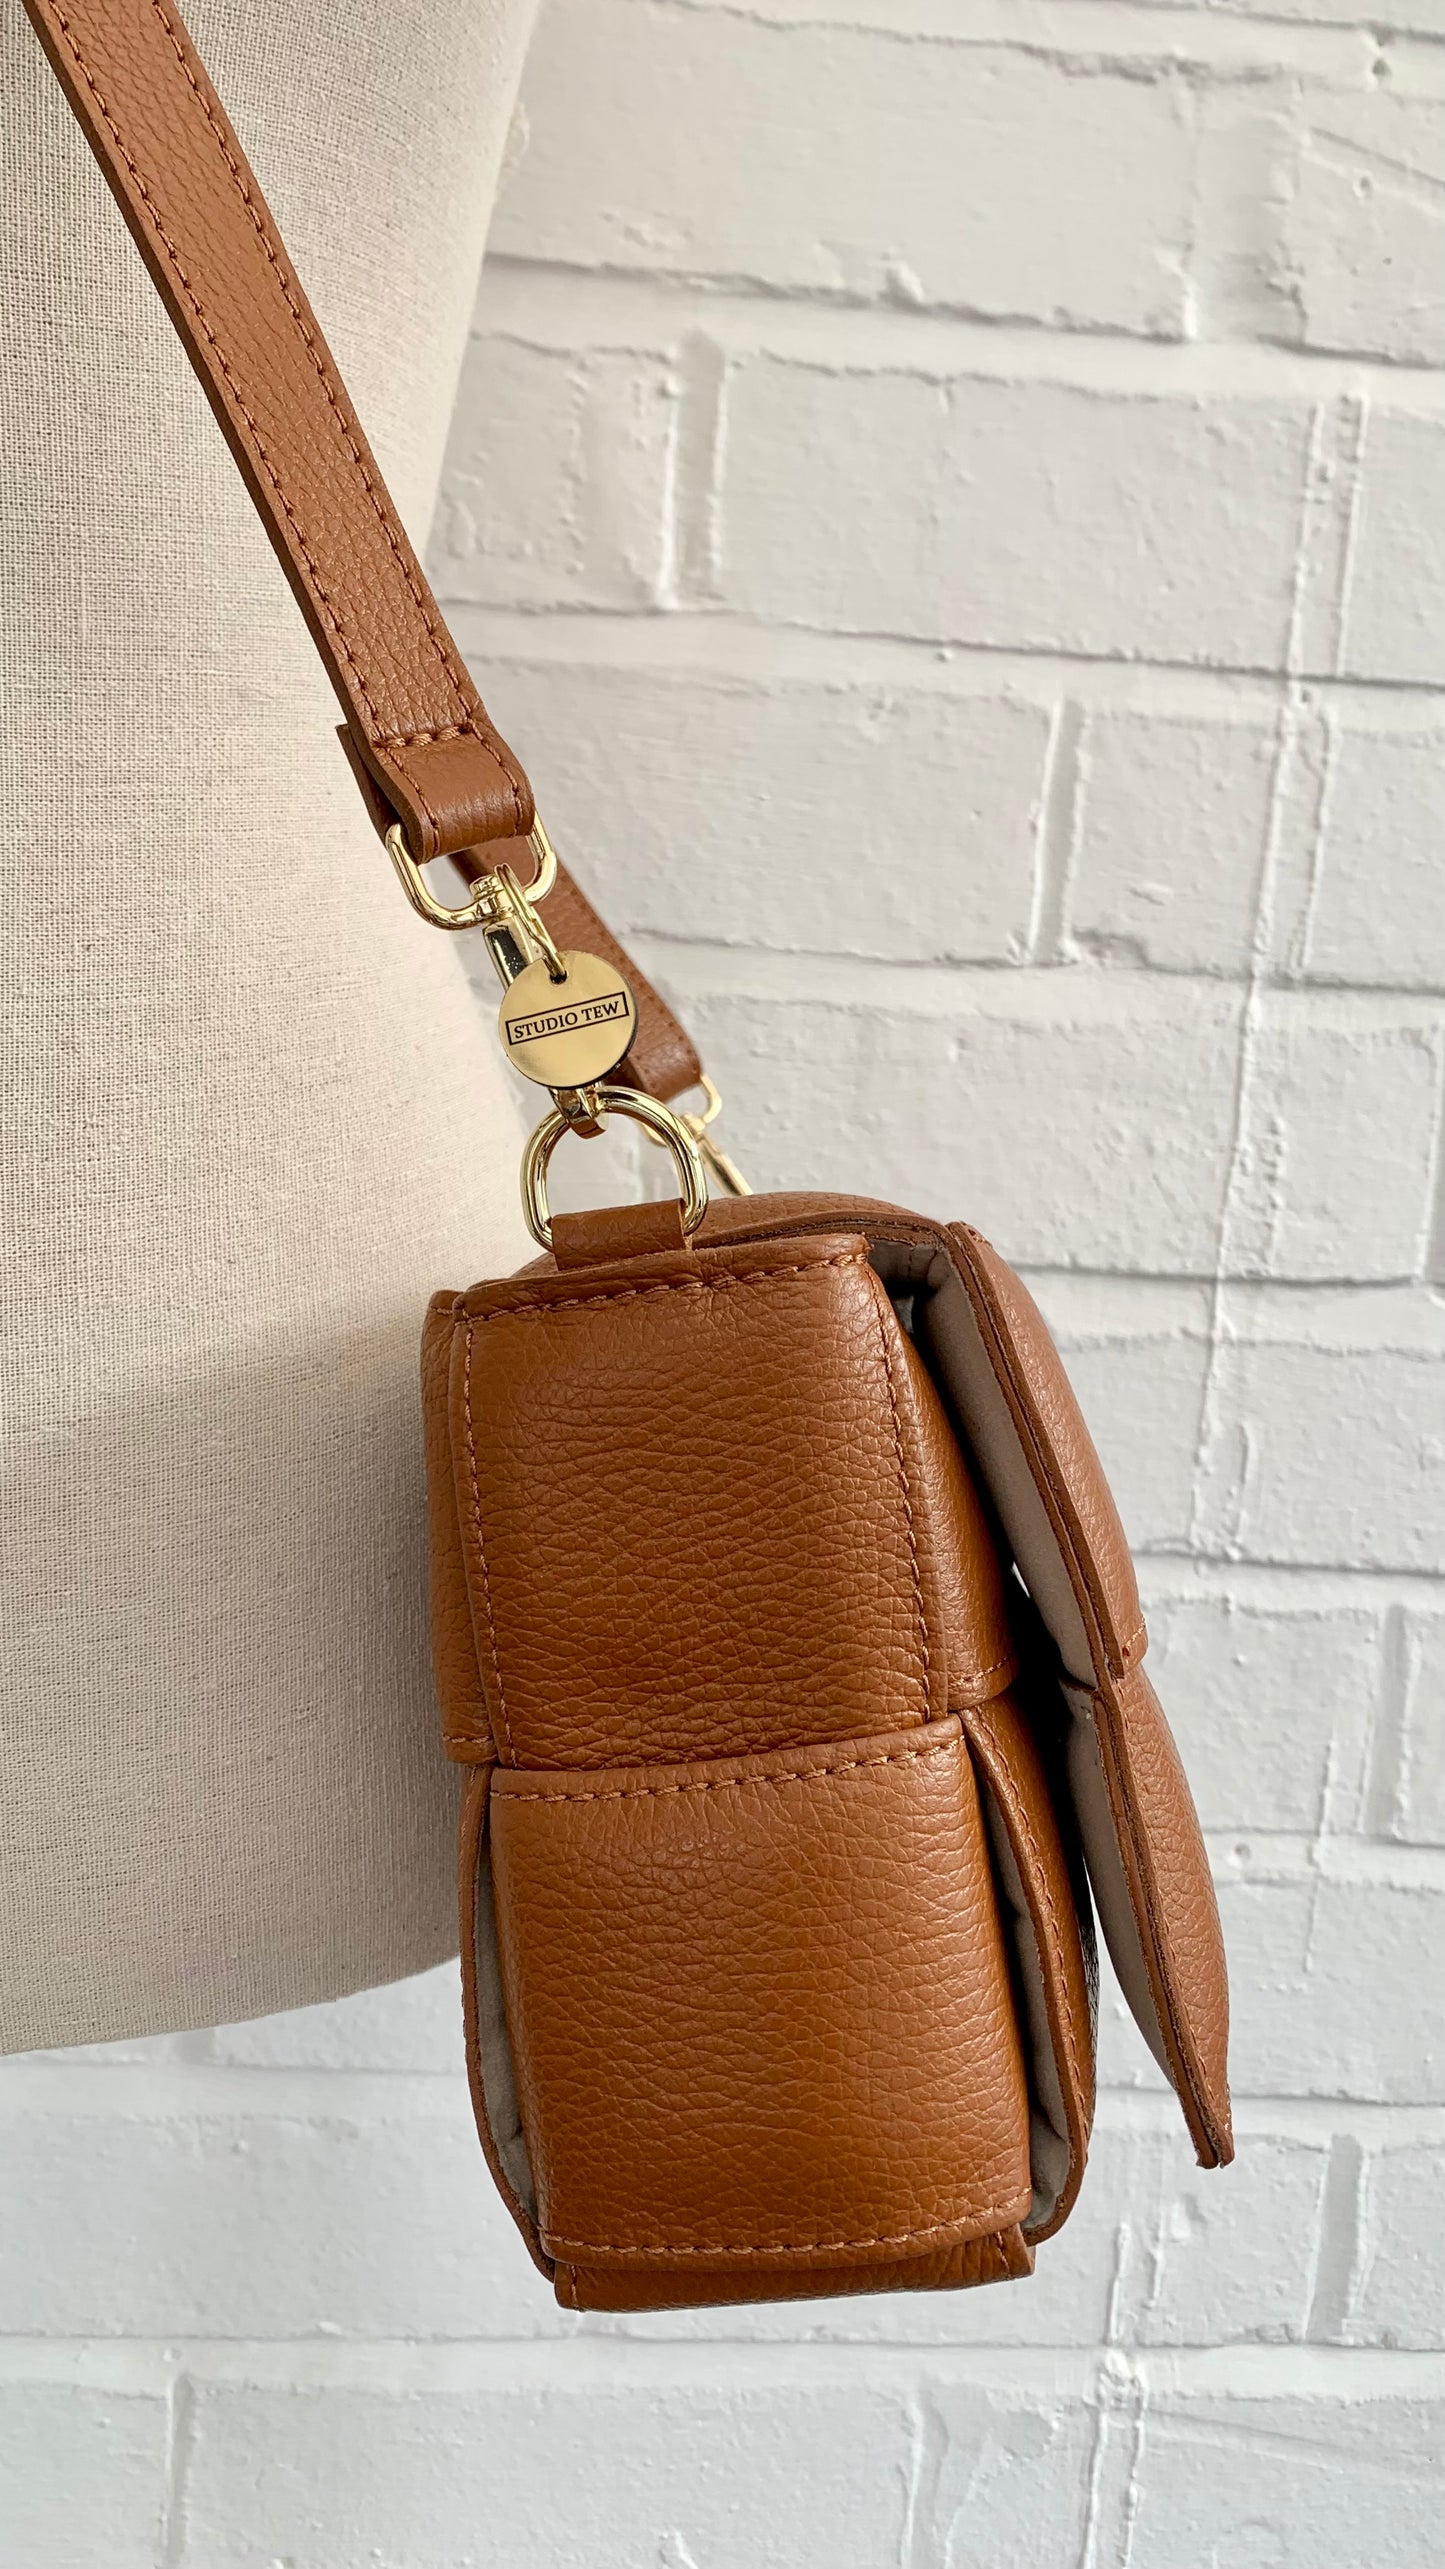 Tan Leather Weaved Bag - Polly